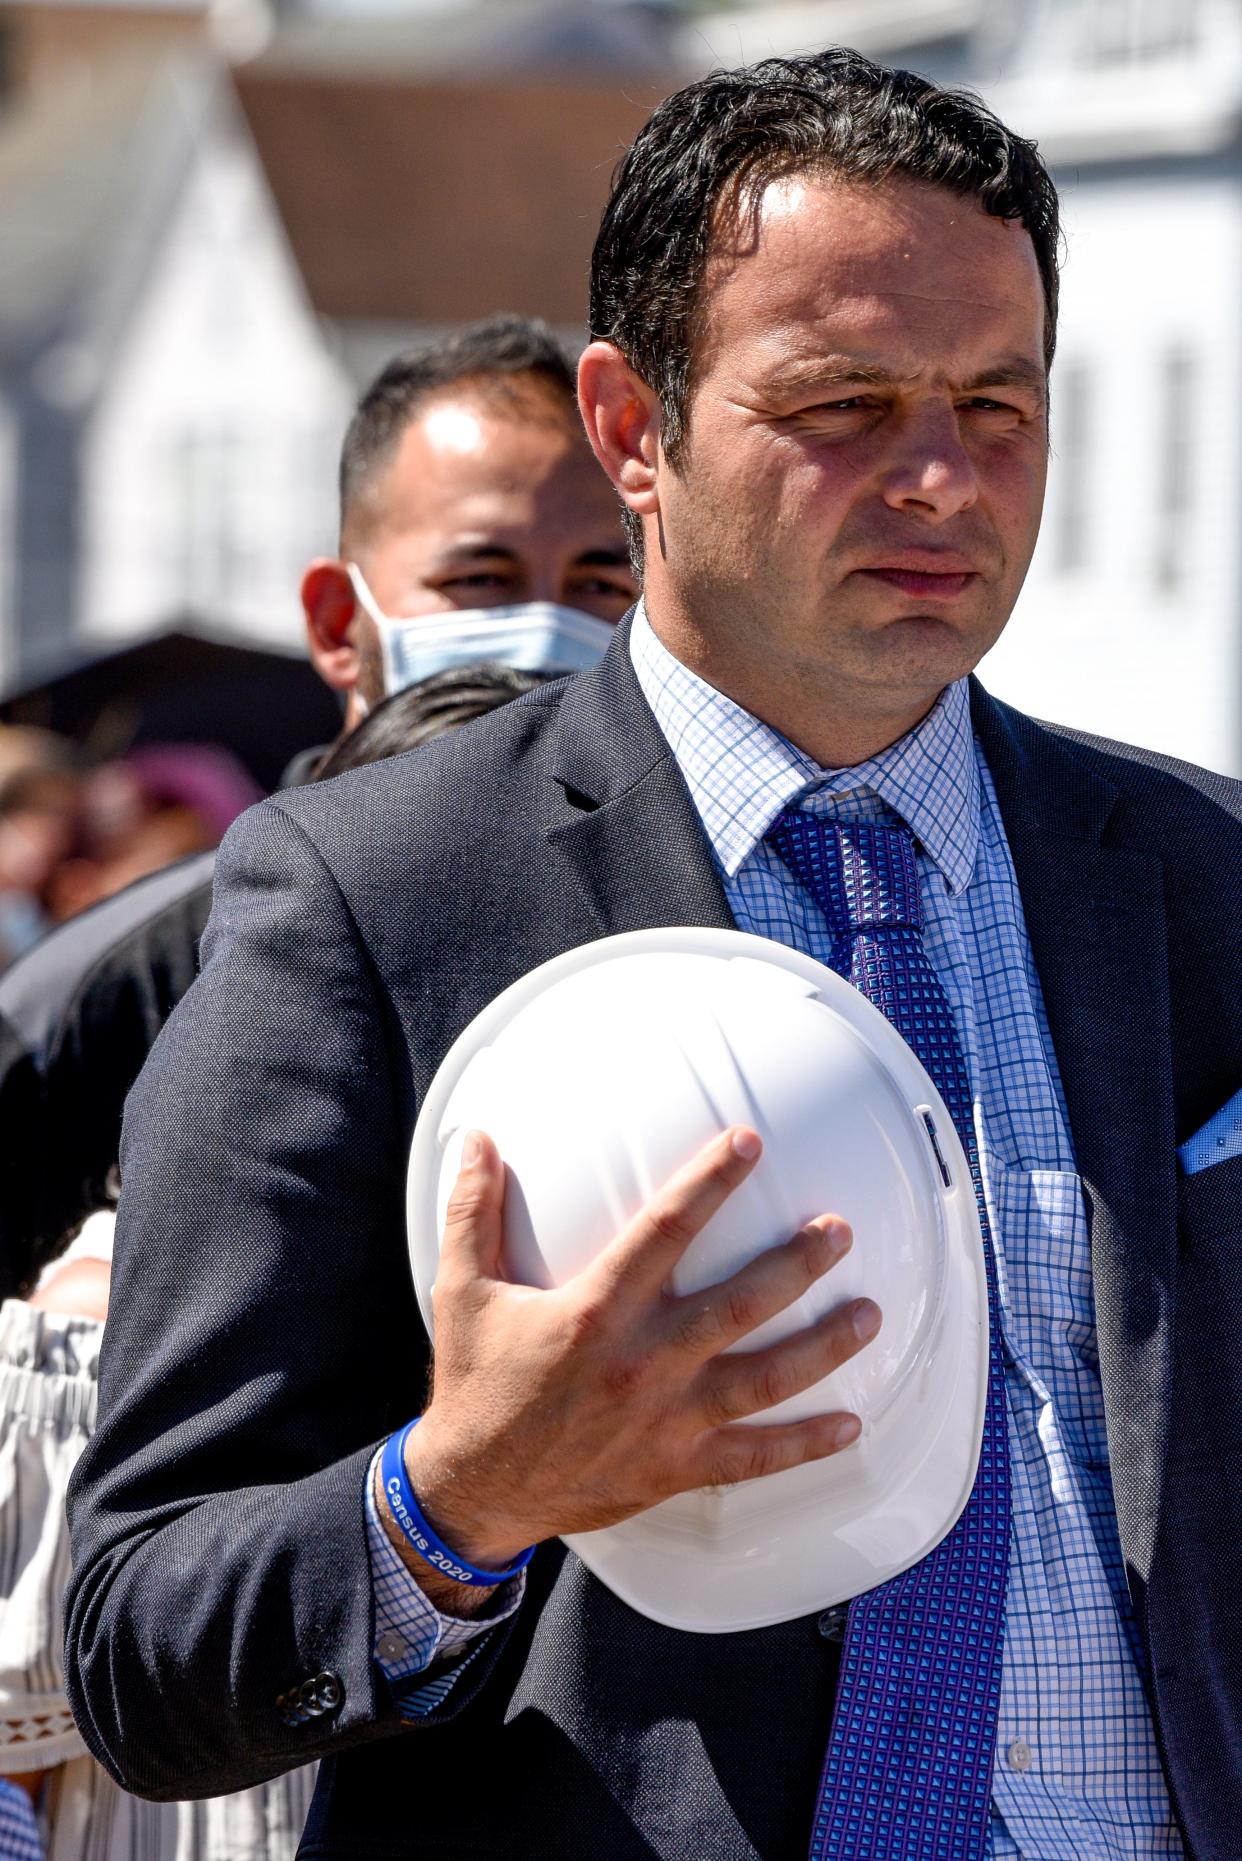 A fire destroyed the Paterson armory in 2015. Paterson officials gather at the site of the armory on Thursday August 20, 2020 to break ground on a new project led by developer Charles Florio to transform the lot into 138 apartments, commercial space as well as a police substation. Paterson Mayor André Sayegh holds a hard hat to his chest. 